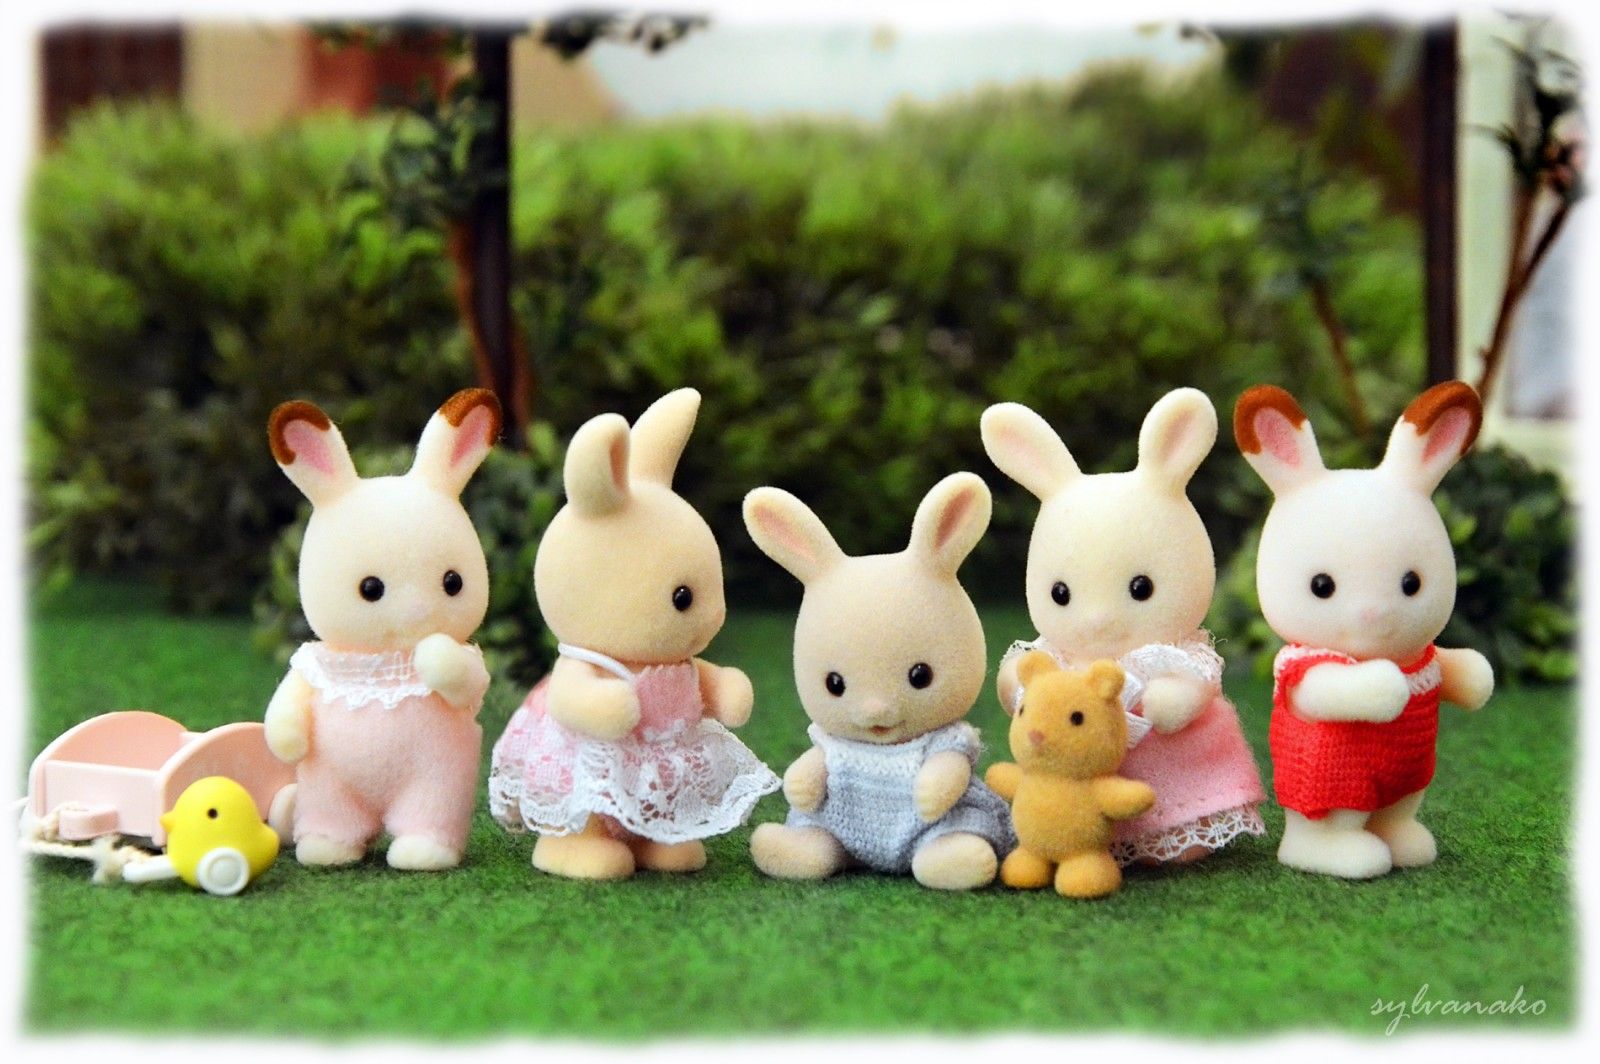 Wallpaper, trees, baby, cute, rabbit, playground, yard, garden, Toy, toys, miniature, sweet, families, company, calico, critters, rabbits, sylvanianfamilies, sylvanian, calicocritters 2200x1463